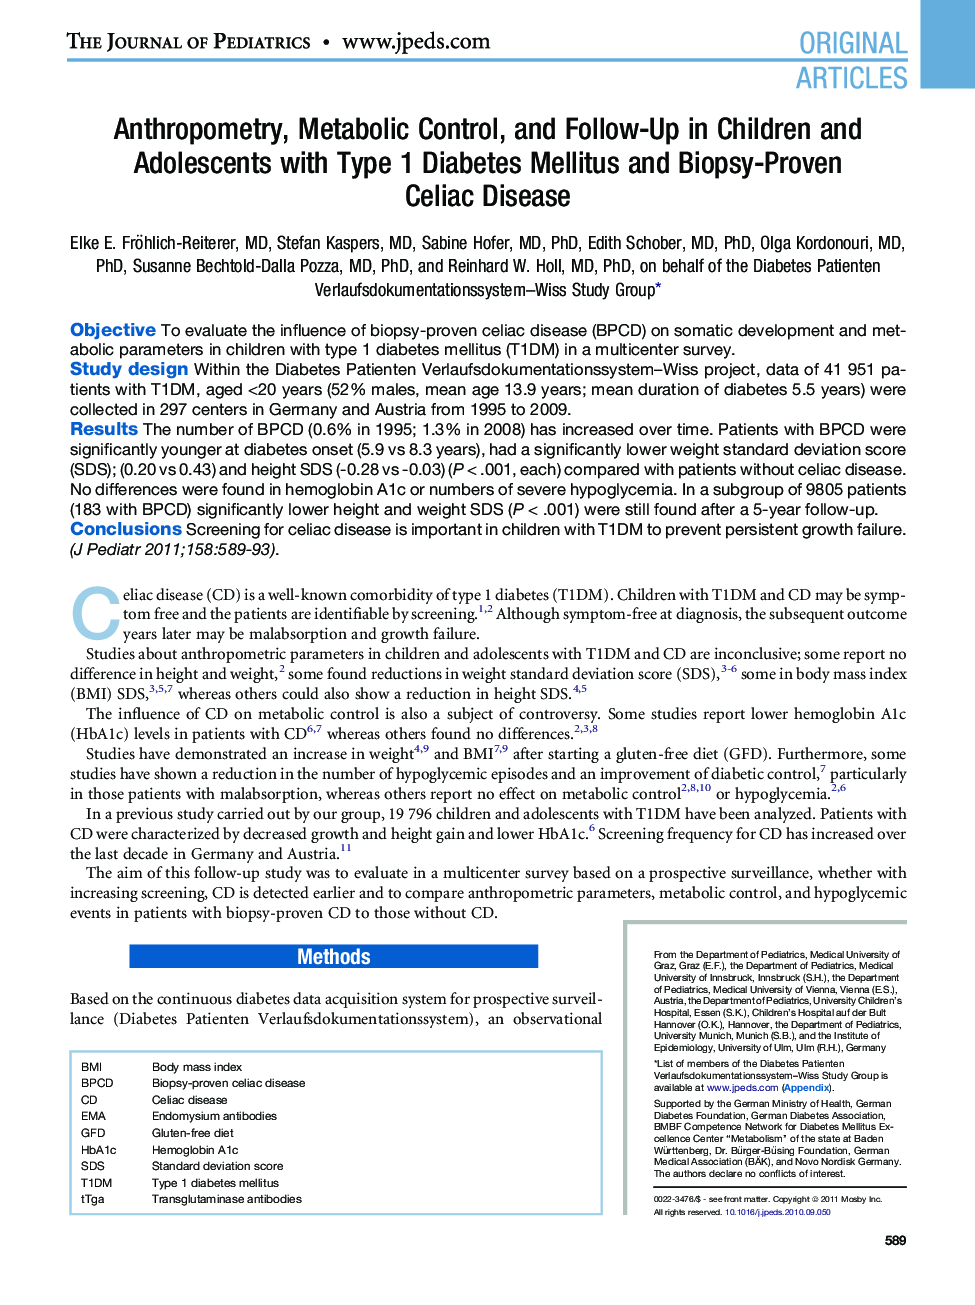 Anthropometry, Metabolic Control, and Follow-Up in Children and Adolescents with Type 1 Diabetes Mellitus and Biopsy-Proven Celiac Disease